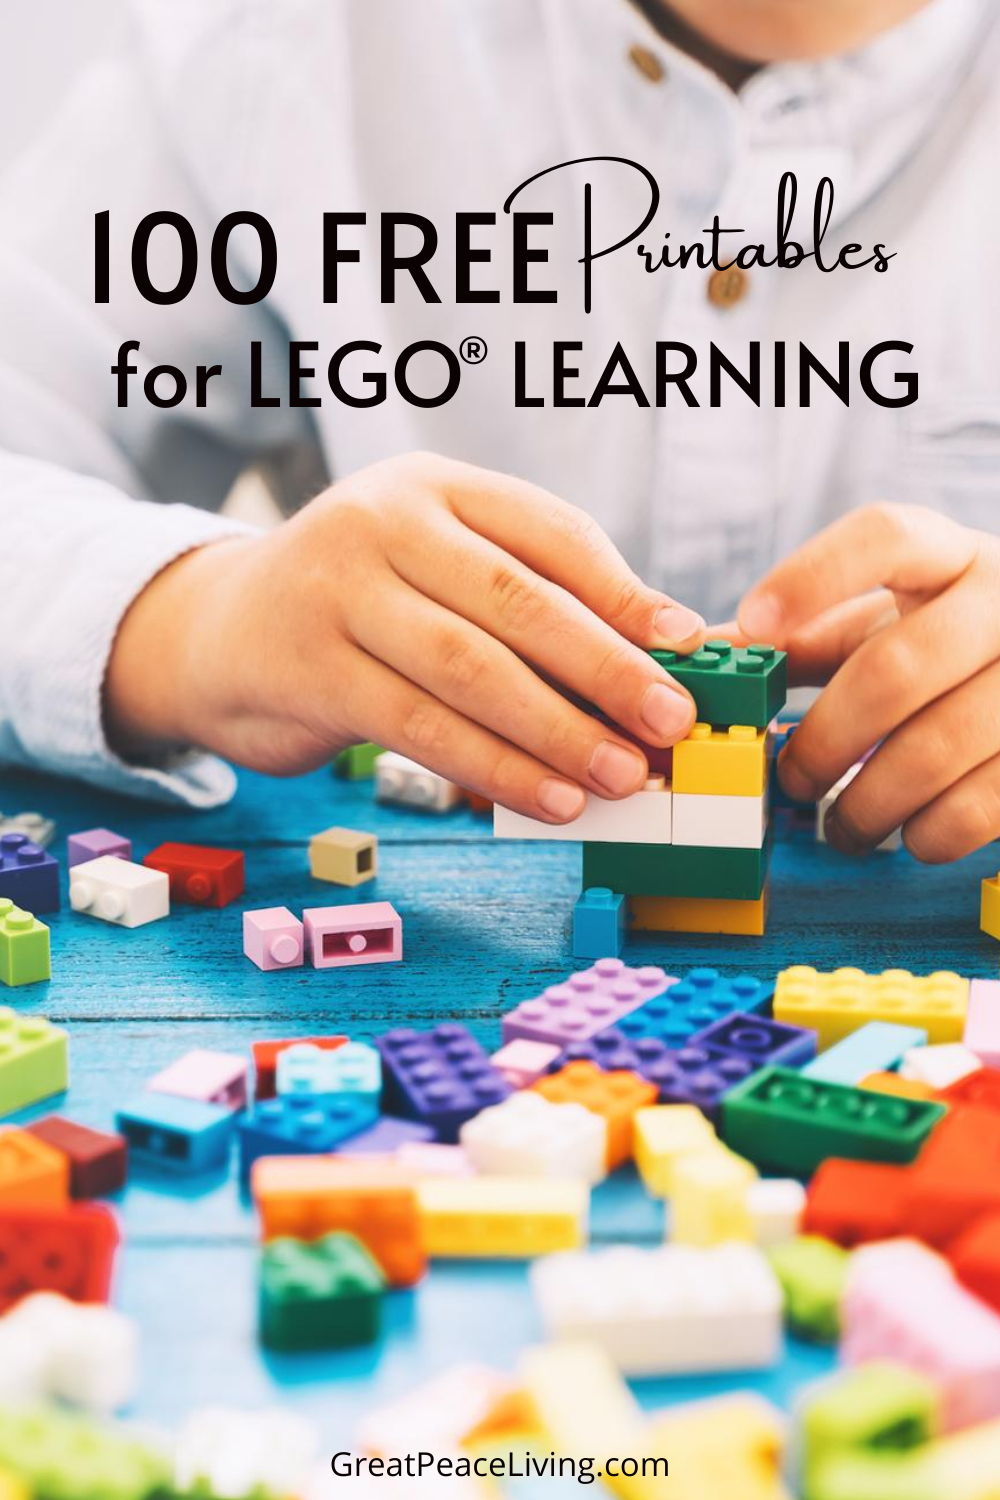 100 Free LEGO Learning Printables